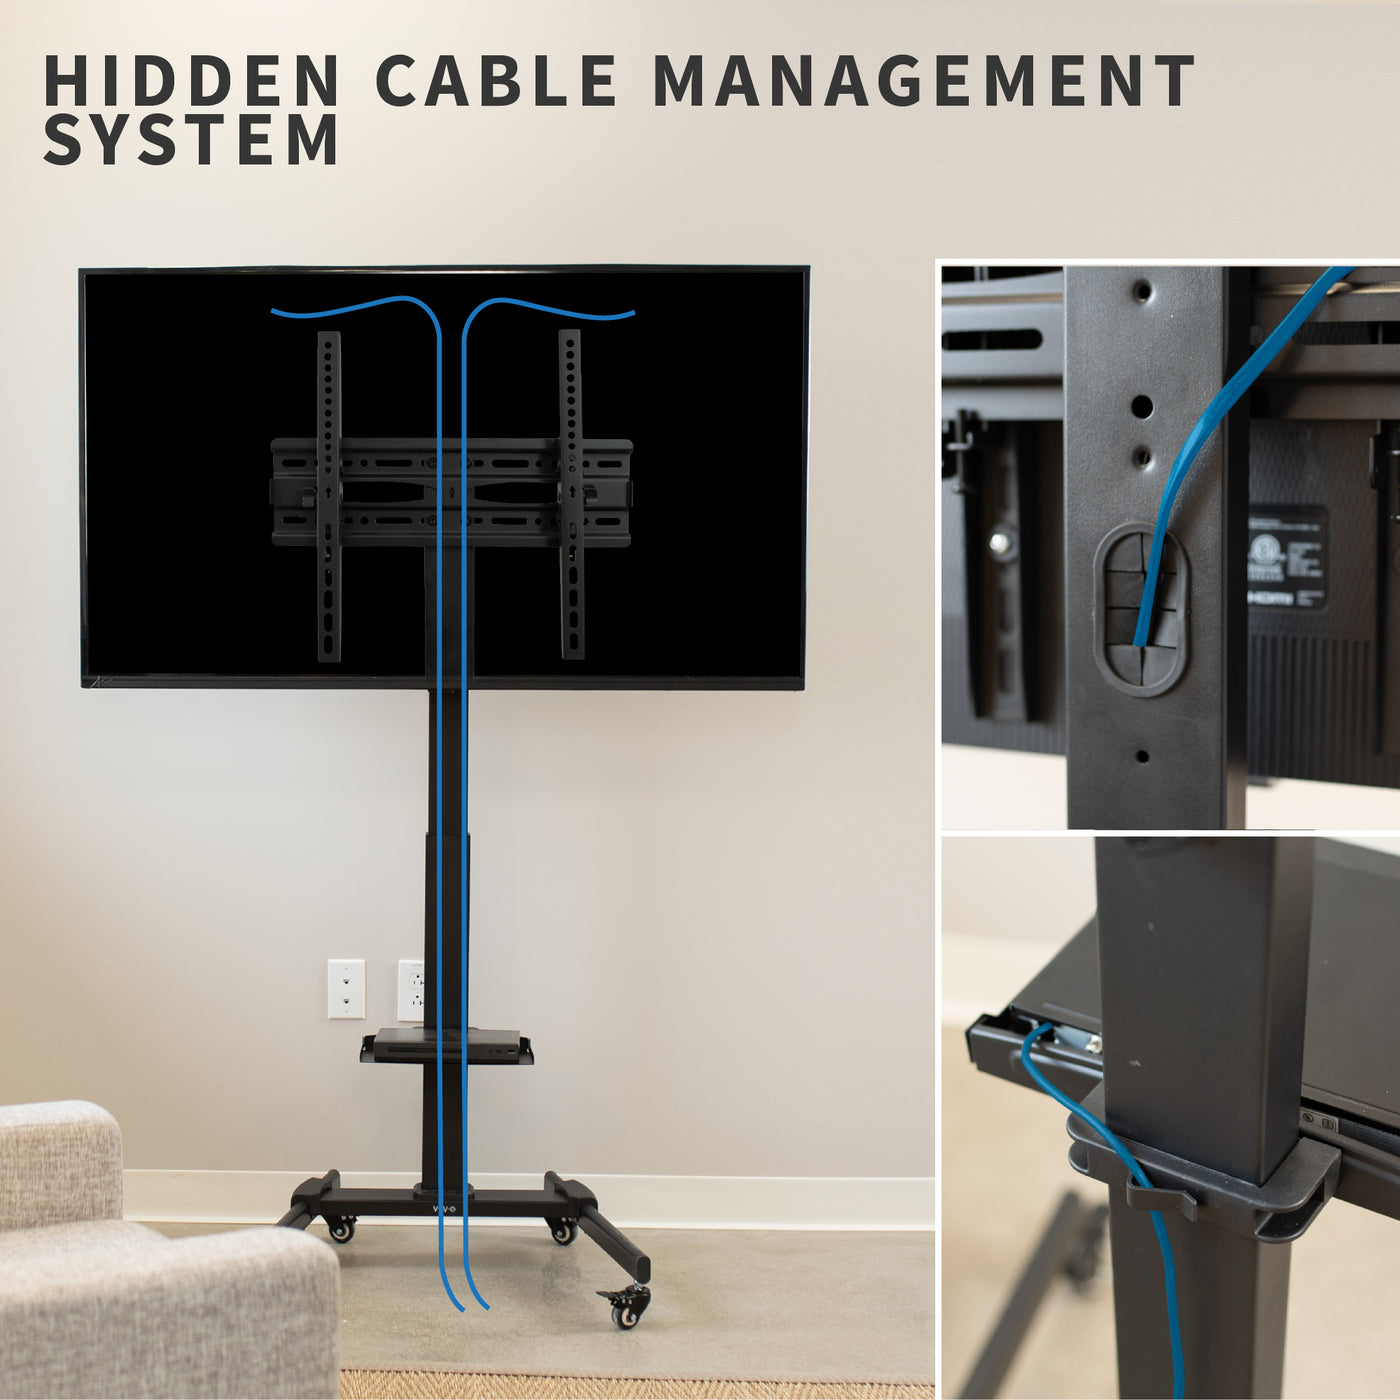 Sturdy mobile height adjustable TV cart with hidden cable management.